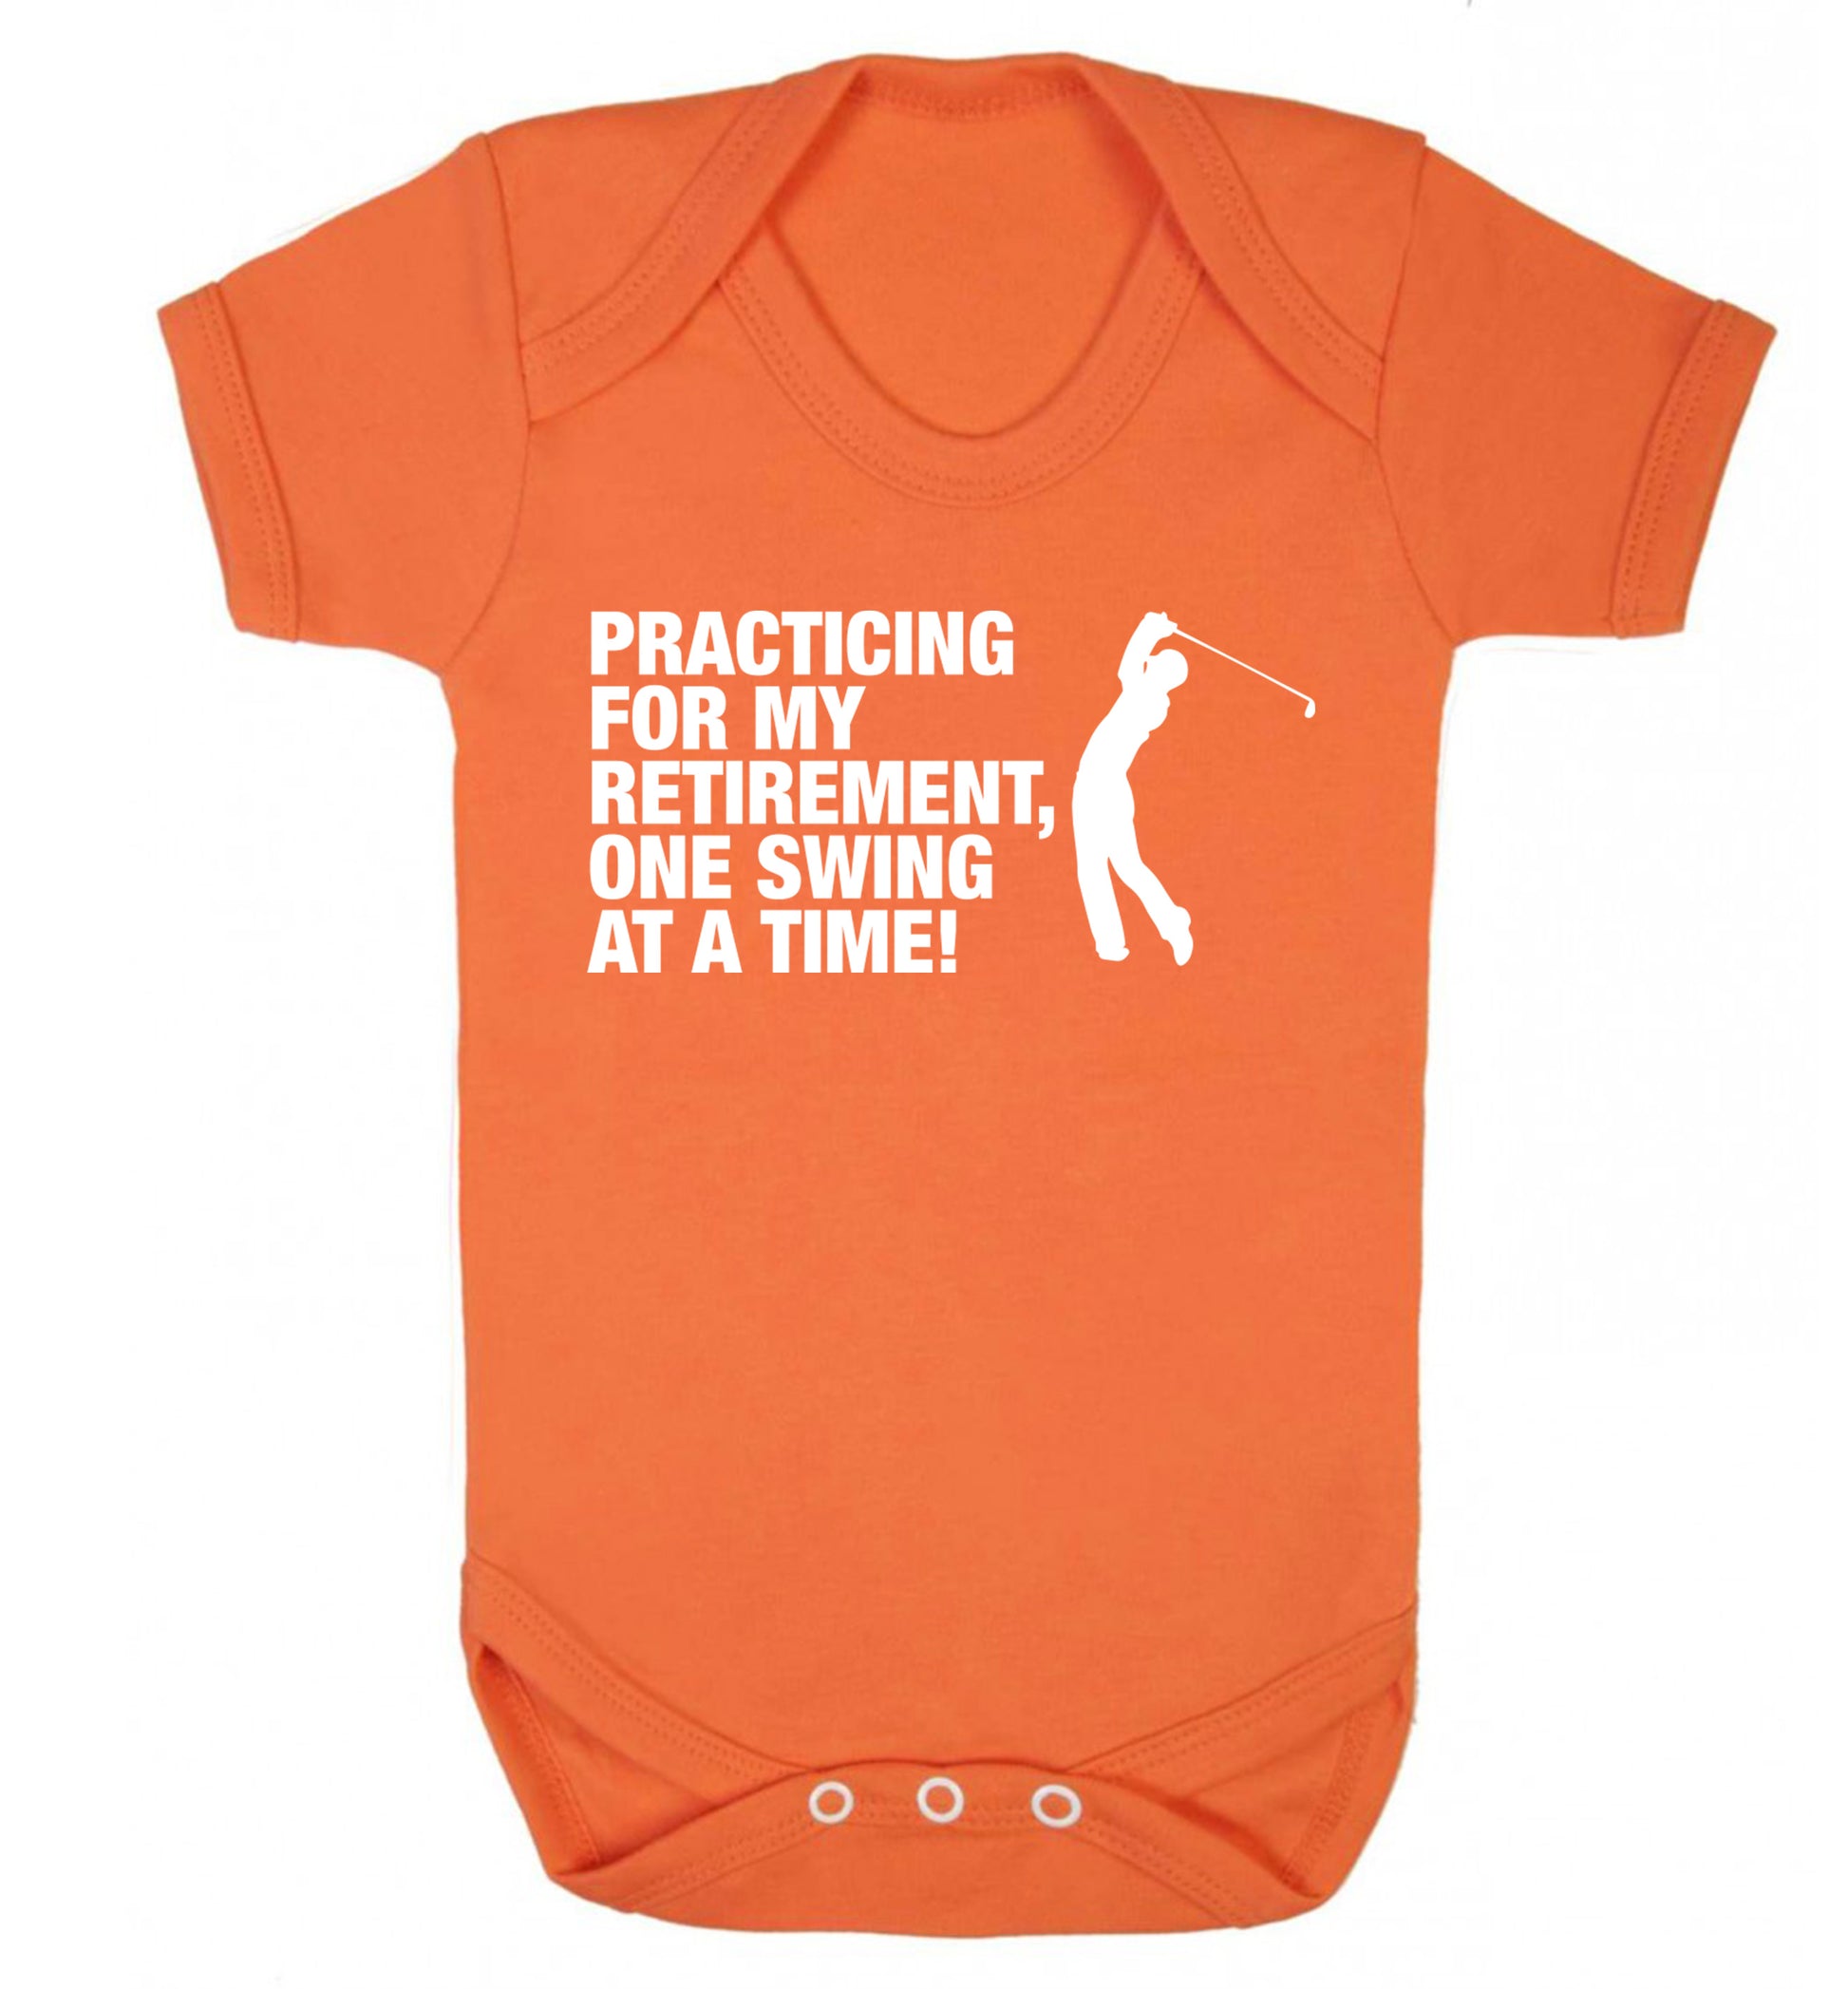 Practicing for my retirement one swing at a time Baby Vest orange 18-24 months